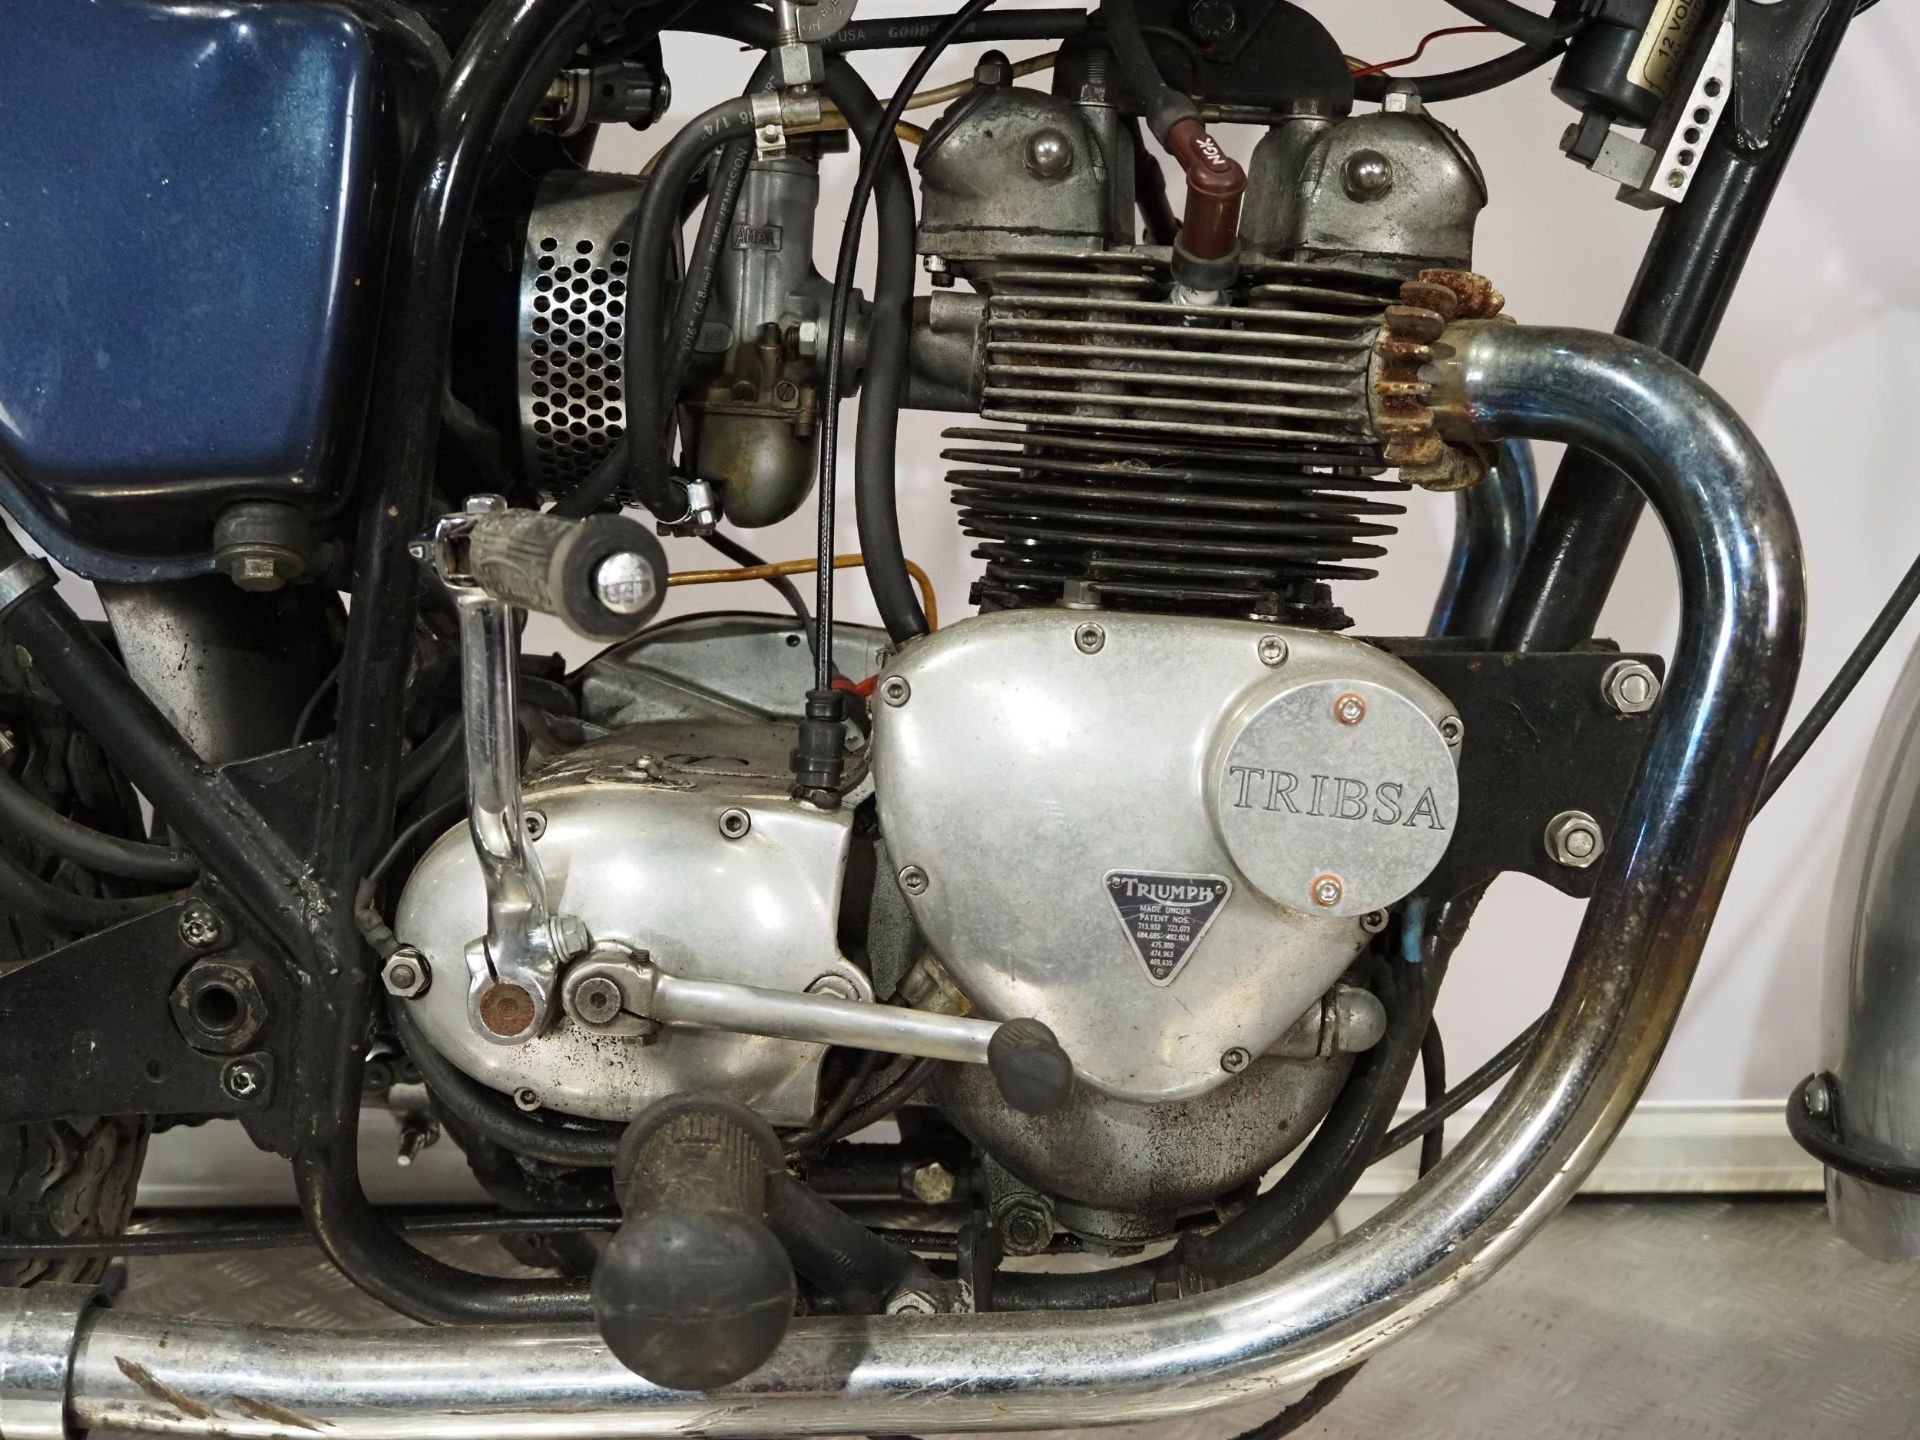 BSA Tribsa motorcycle. 1968. 500cc Frame No. B25B1560 Engine No. T100AH14985 Part of a deceased - Image 4 of 7